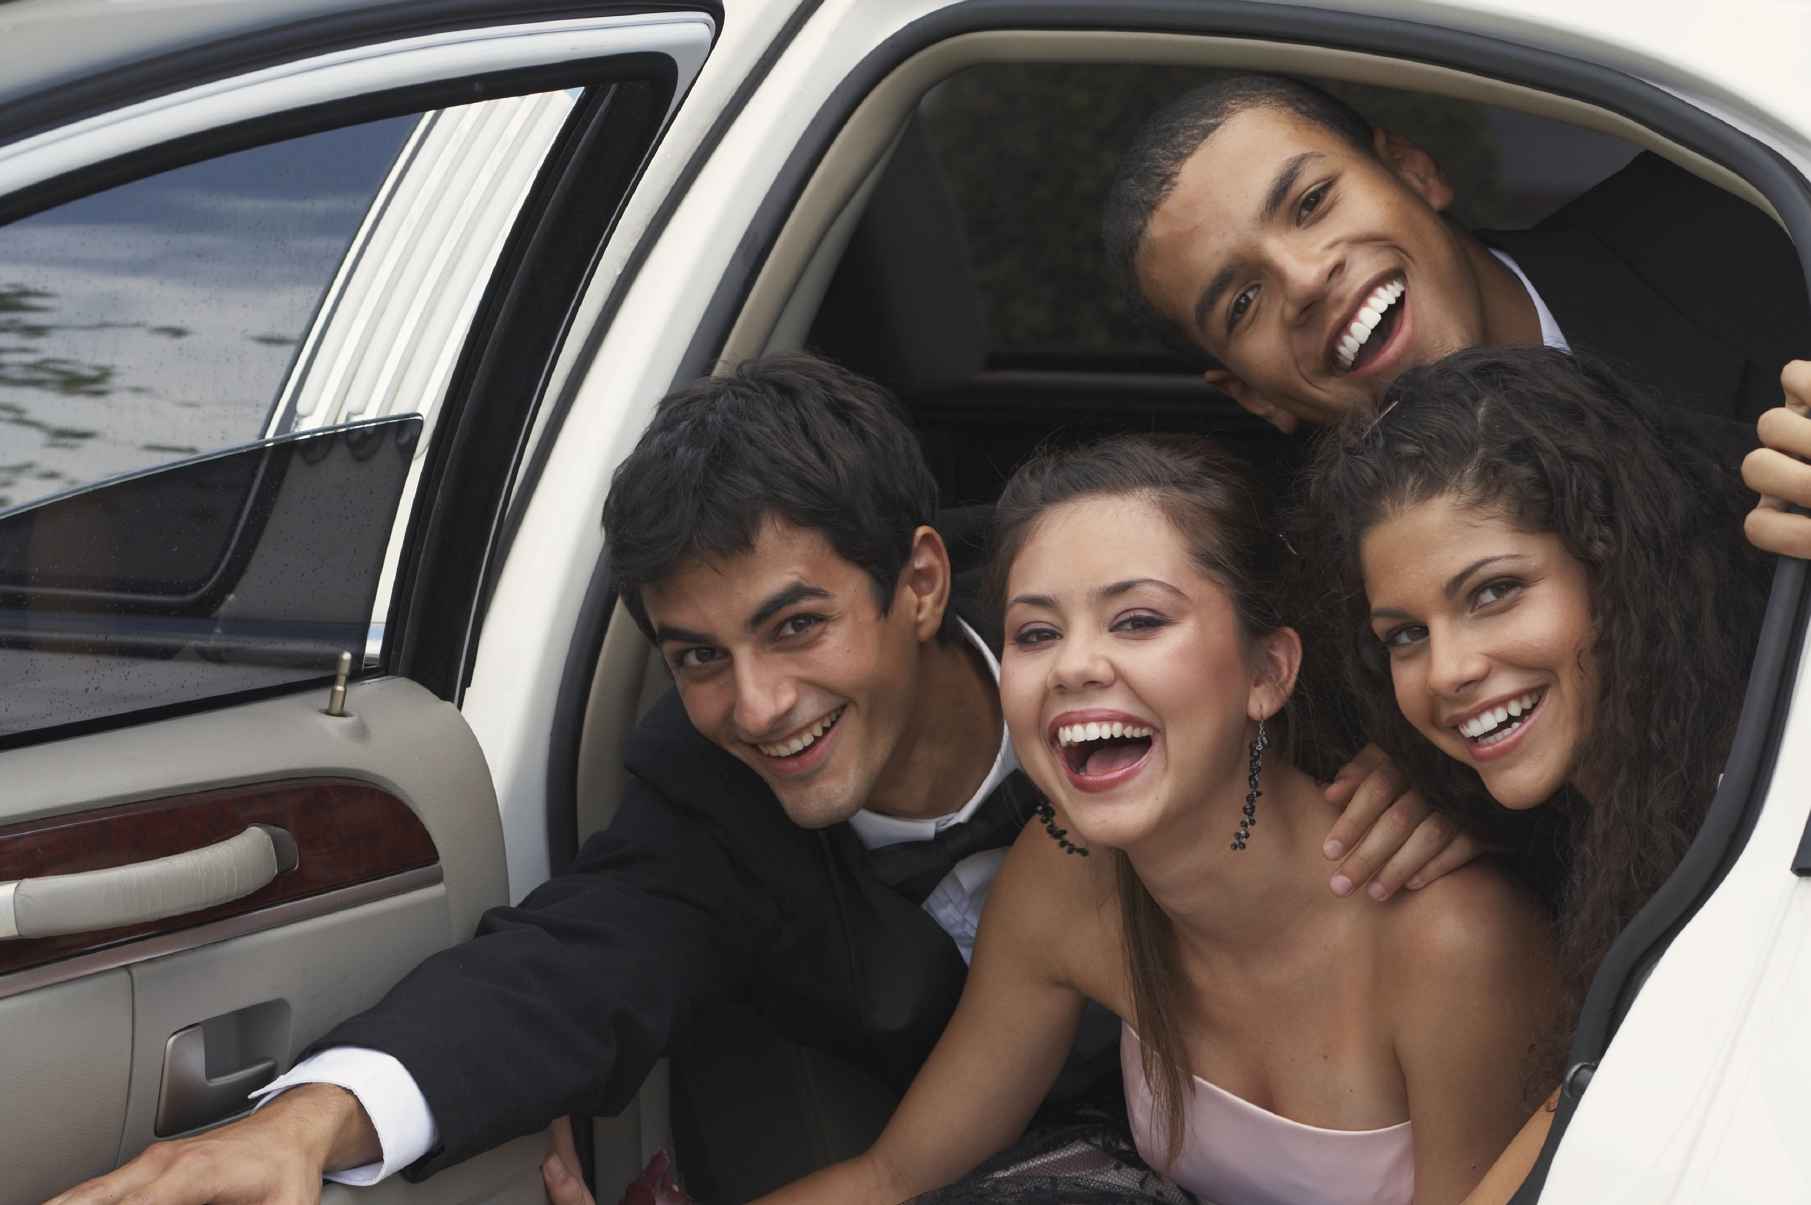 Arrive in style to your school formal in one of 2 B Chauffeured cars.